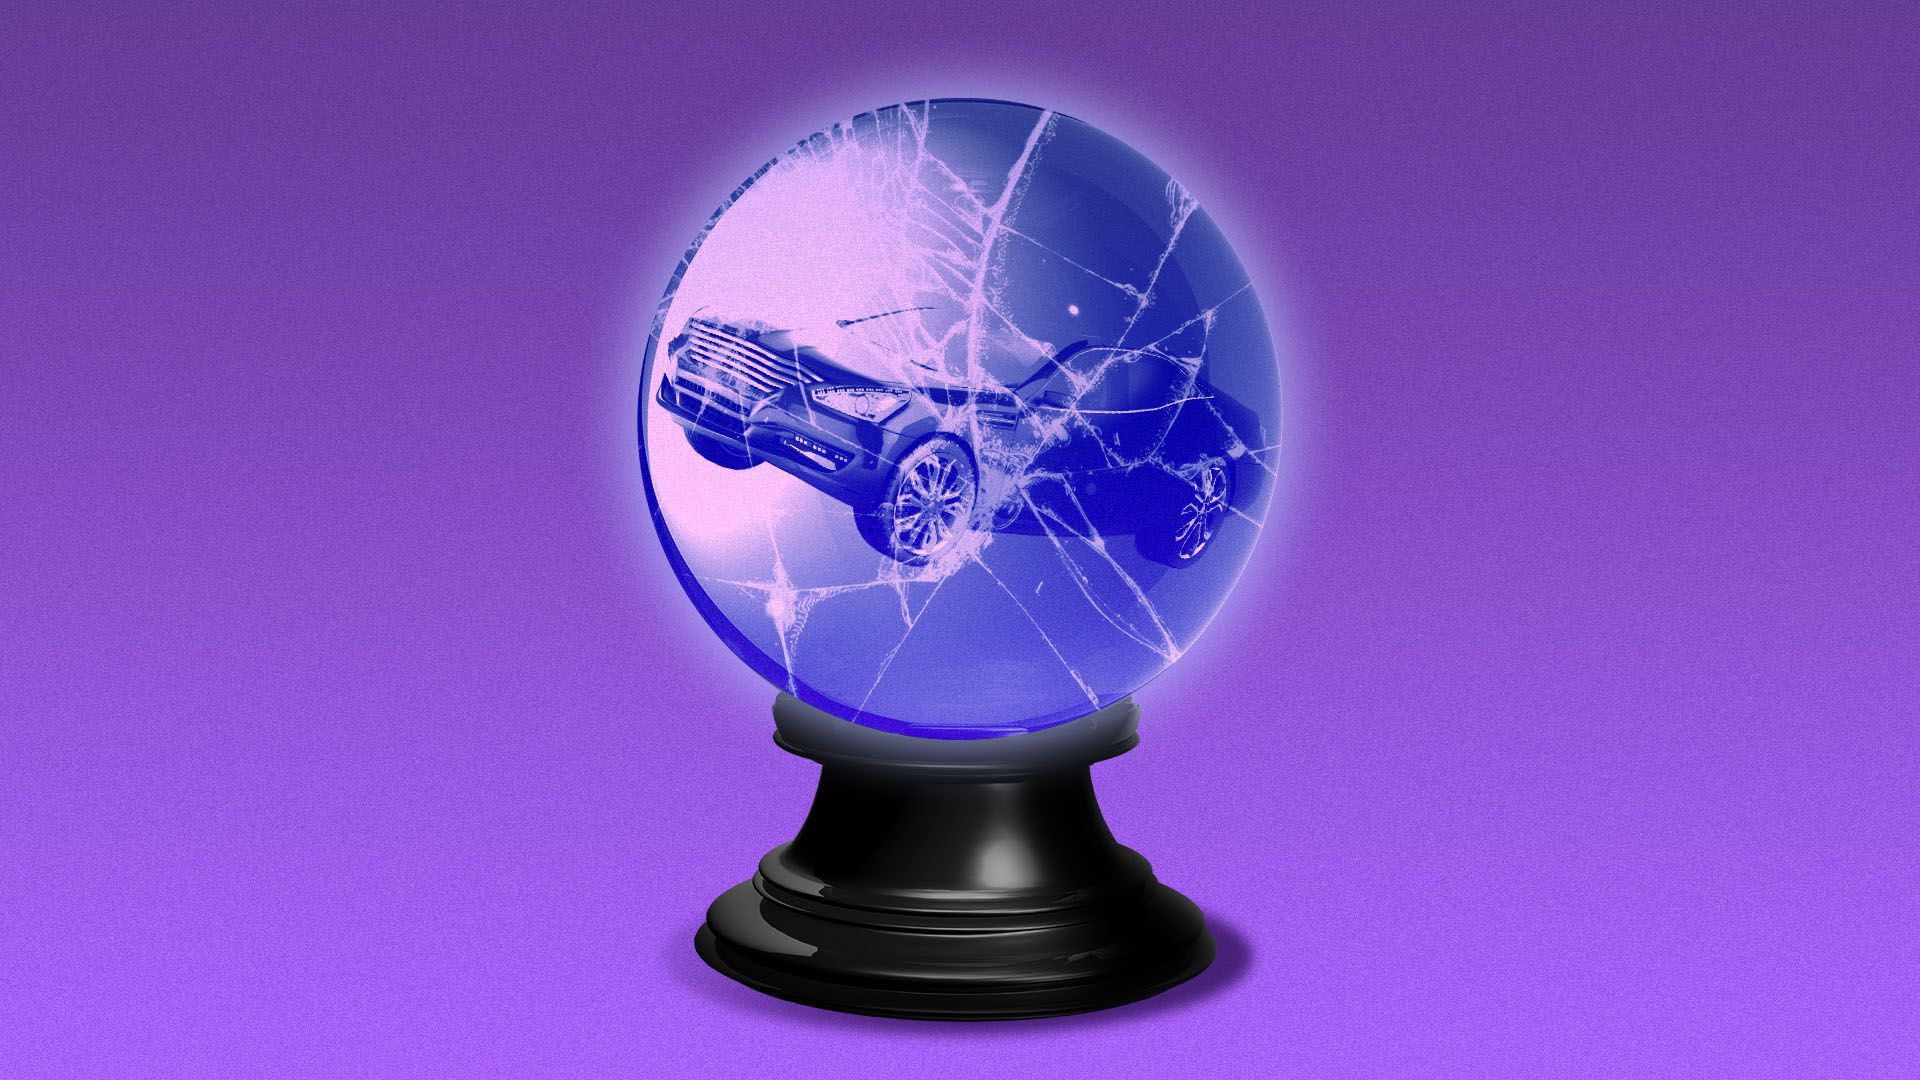 Illustration of a car in a crystal ball